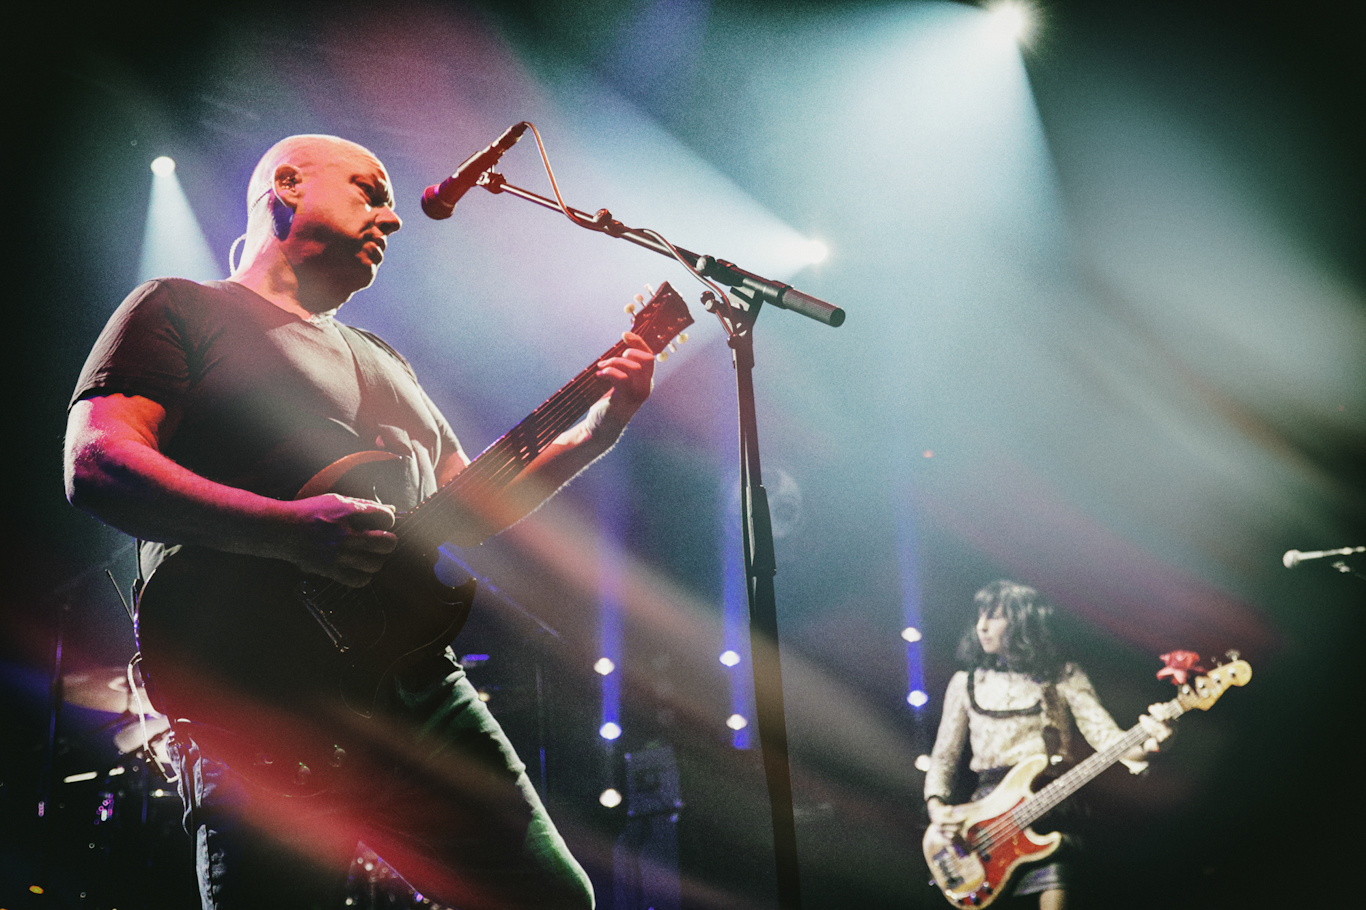 LIVE REVIEW: The Pixies at Camden Roundhouse Credit: Denise Esposito